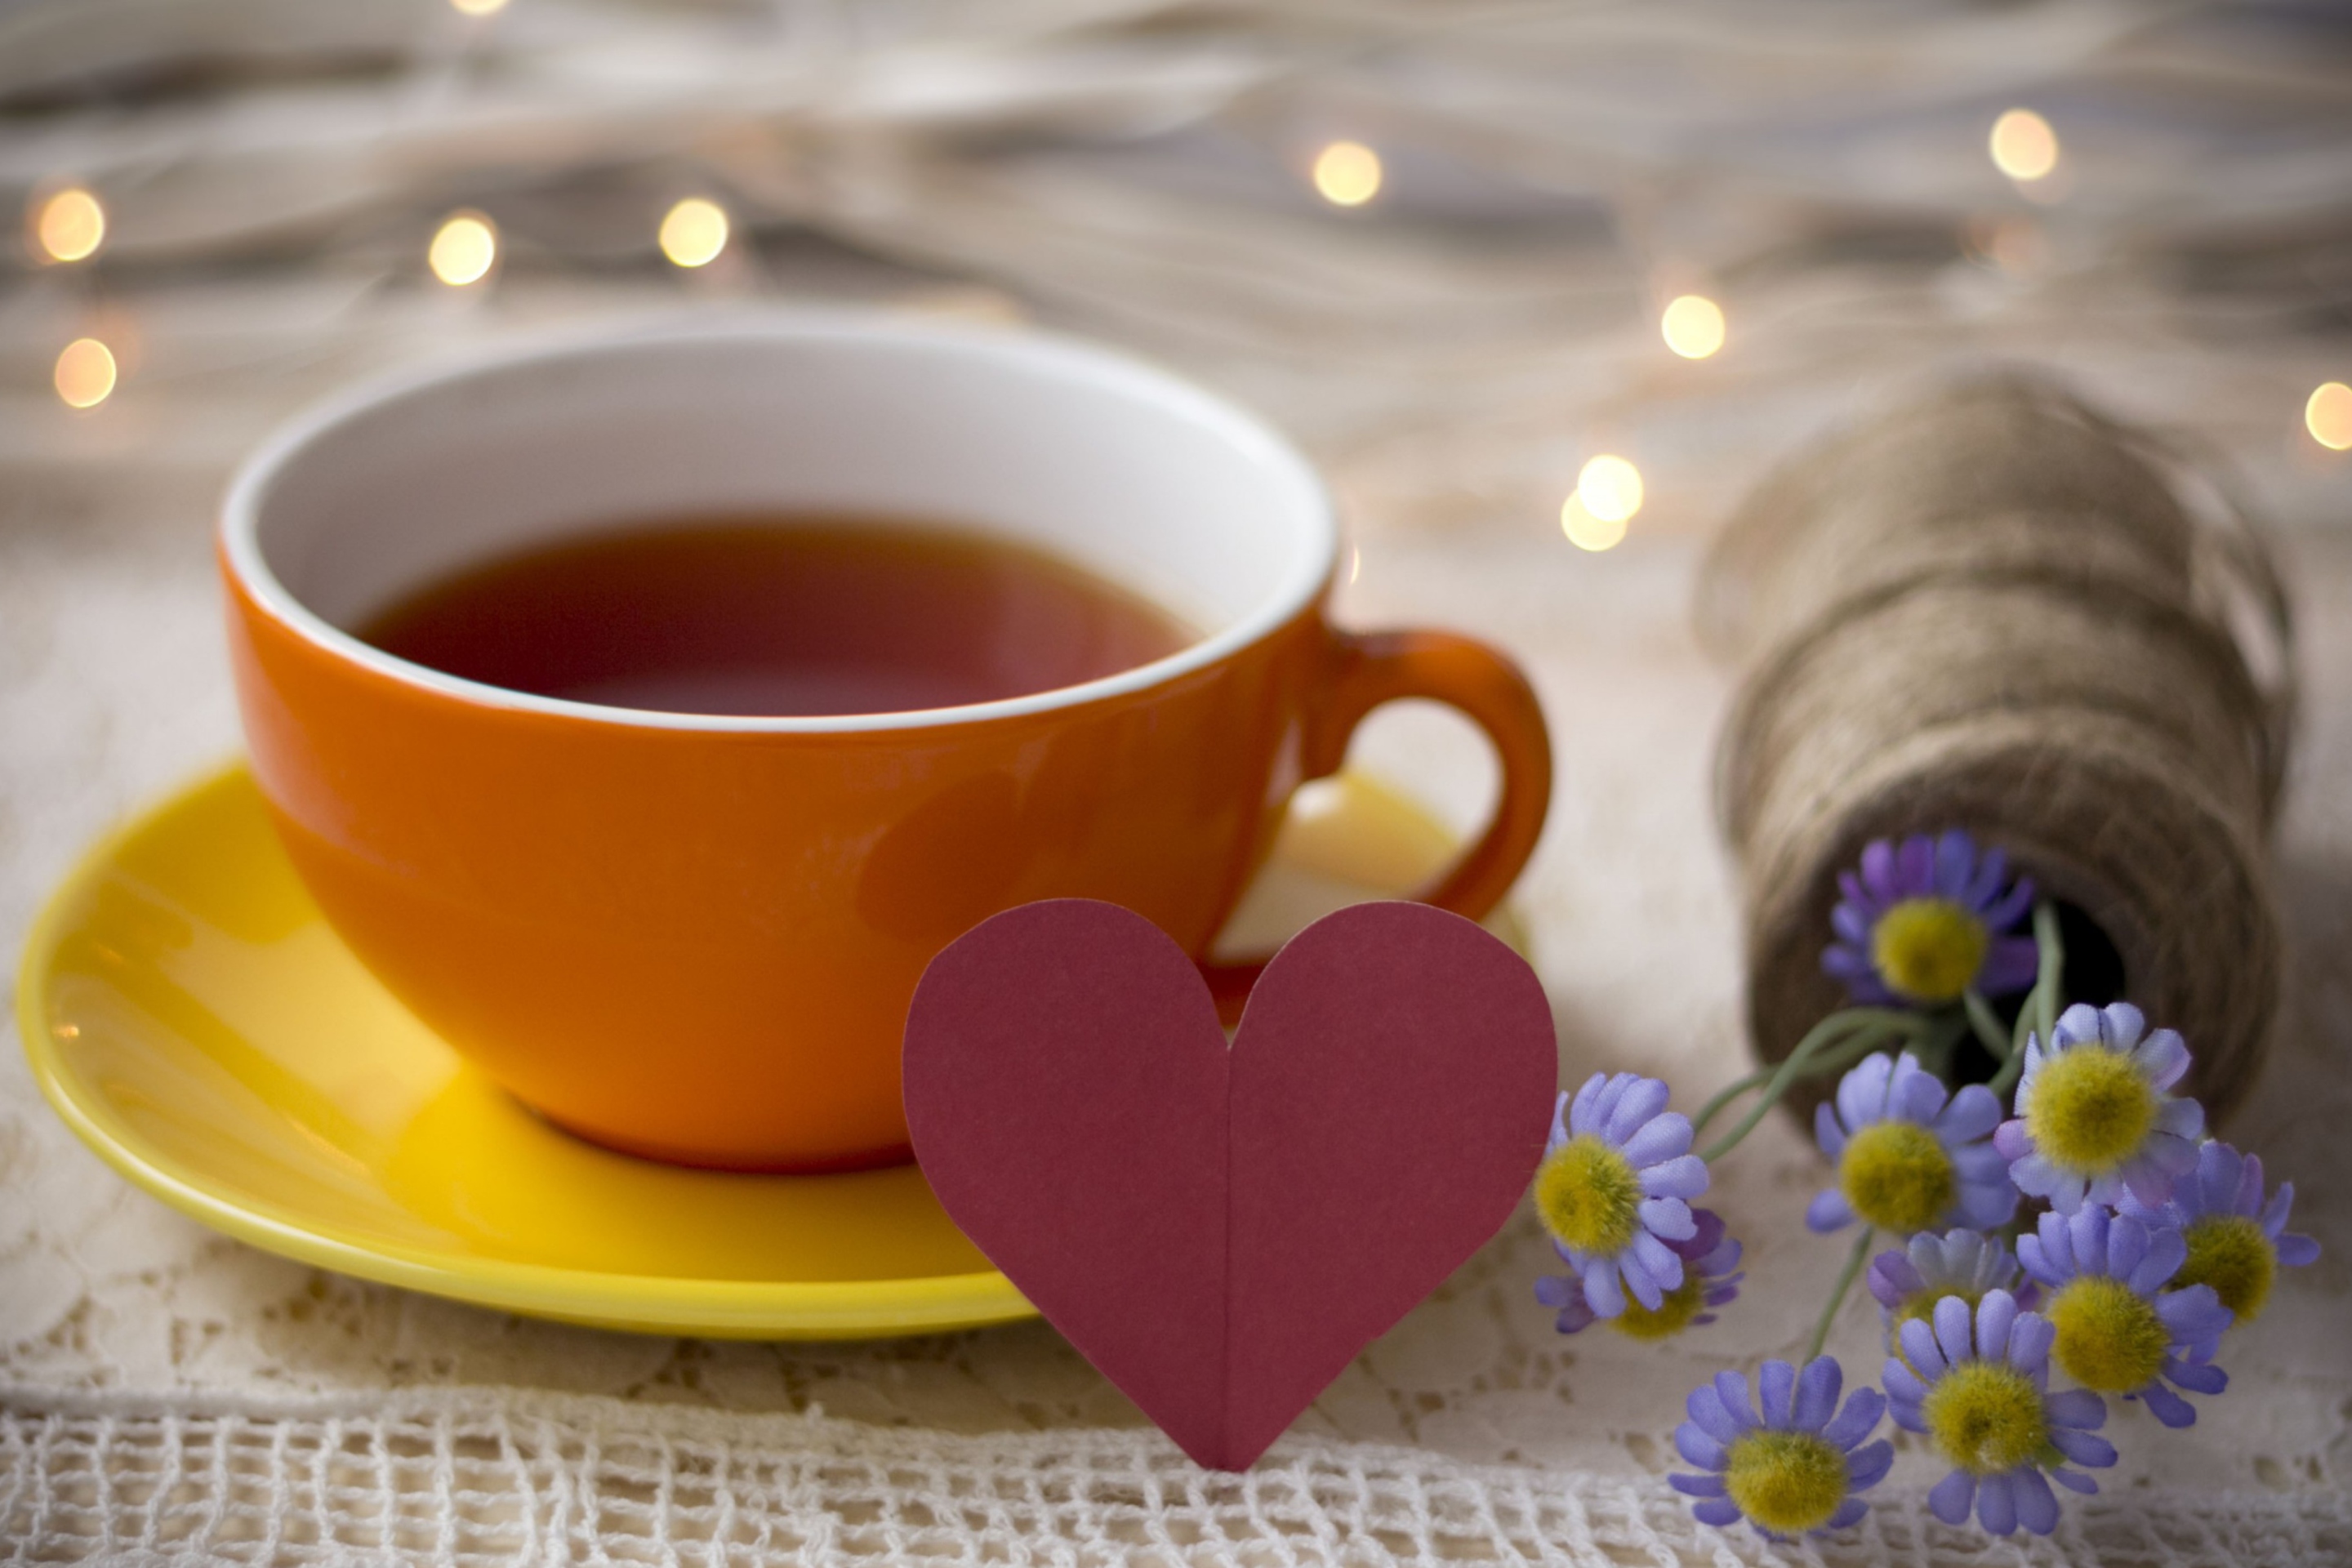 Tea Made With Love wallpaper 2880x1920